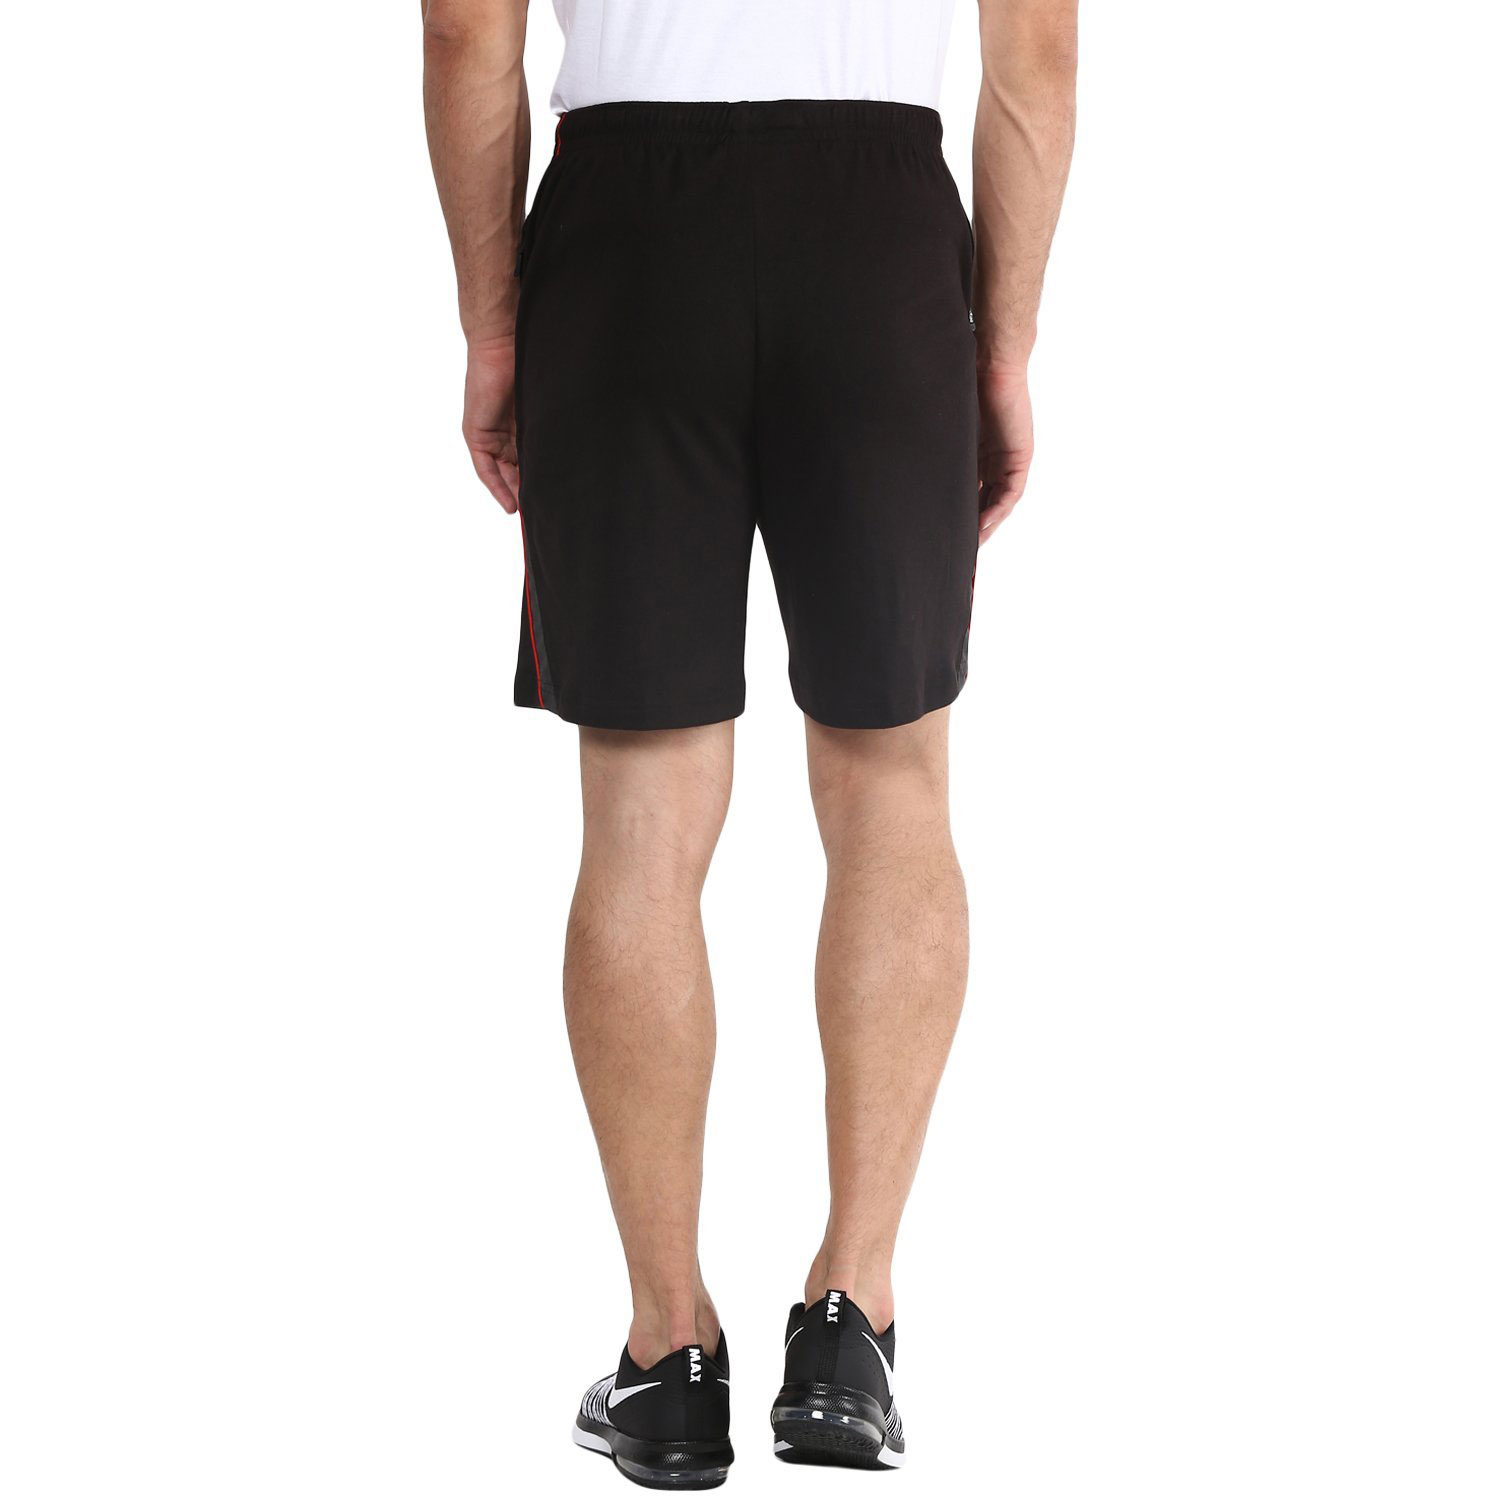  Berge Men's Black Knits Long Shorts With Secure Zipper Pockets